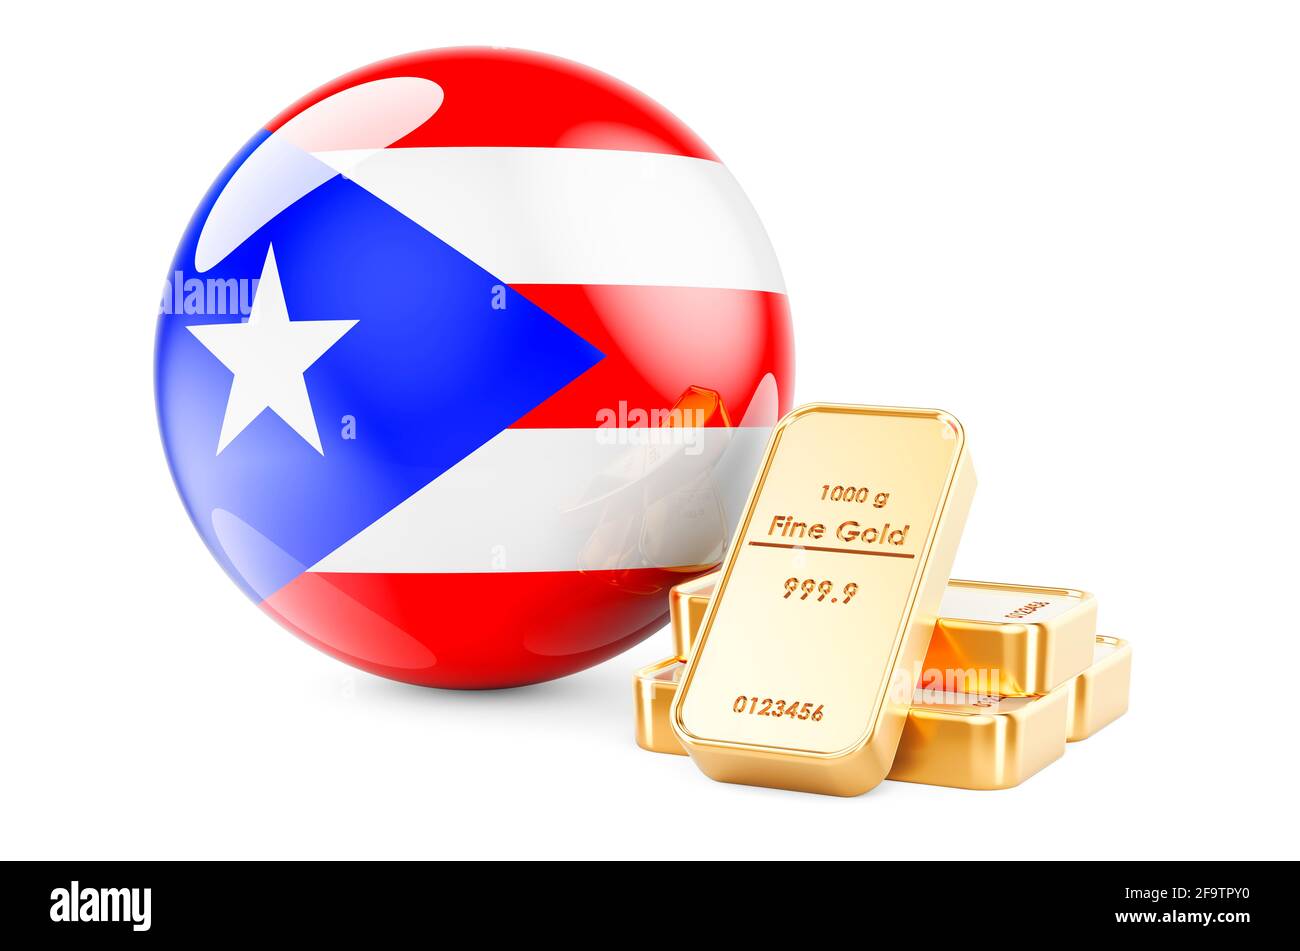 Puerto rico bank Cut Out Stock Images & Pictures - Alamy